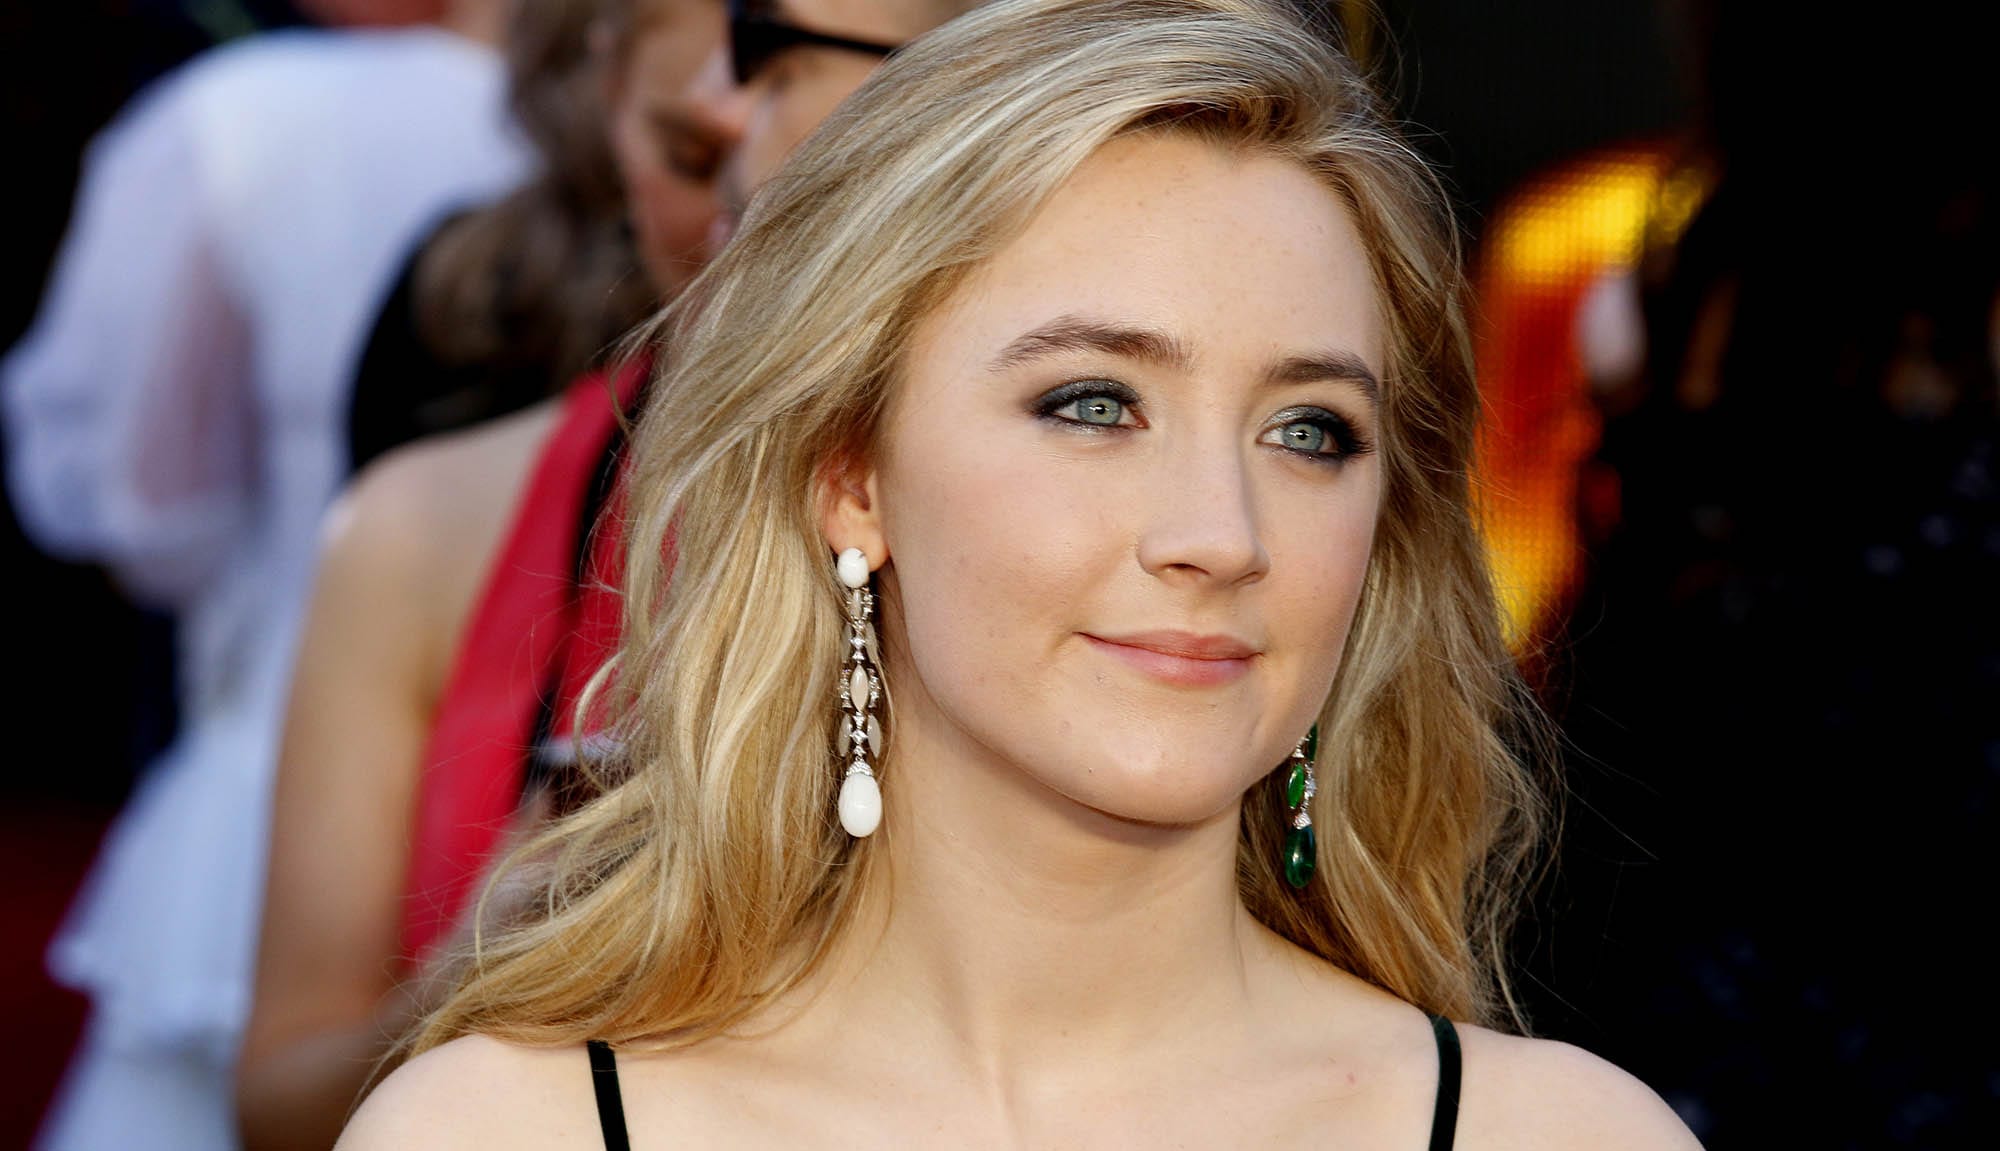 Saoirse Ronan has inhabited some absolutely outstanding roles over the years. We look at why she's Hollywood’s leading lady for a new generation.